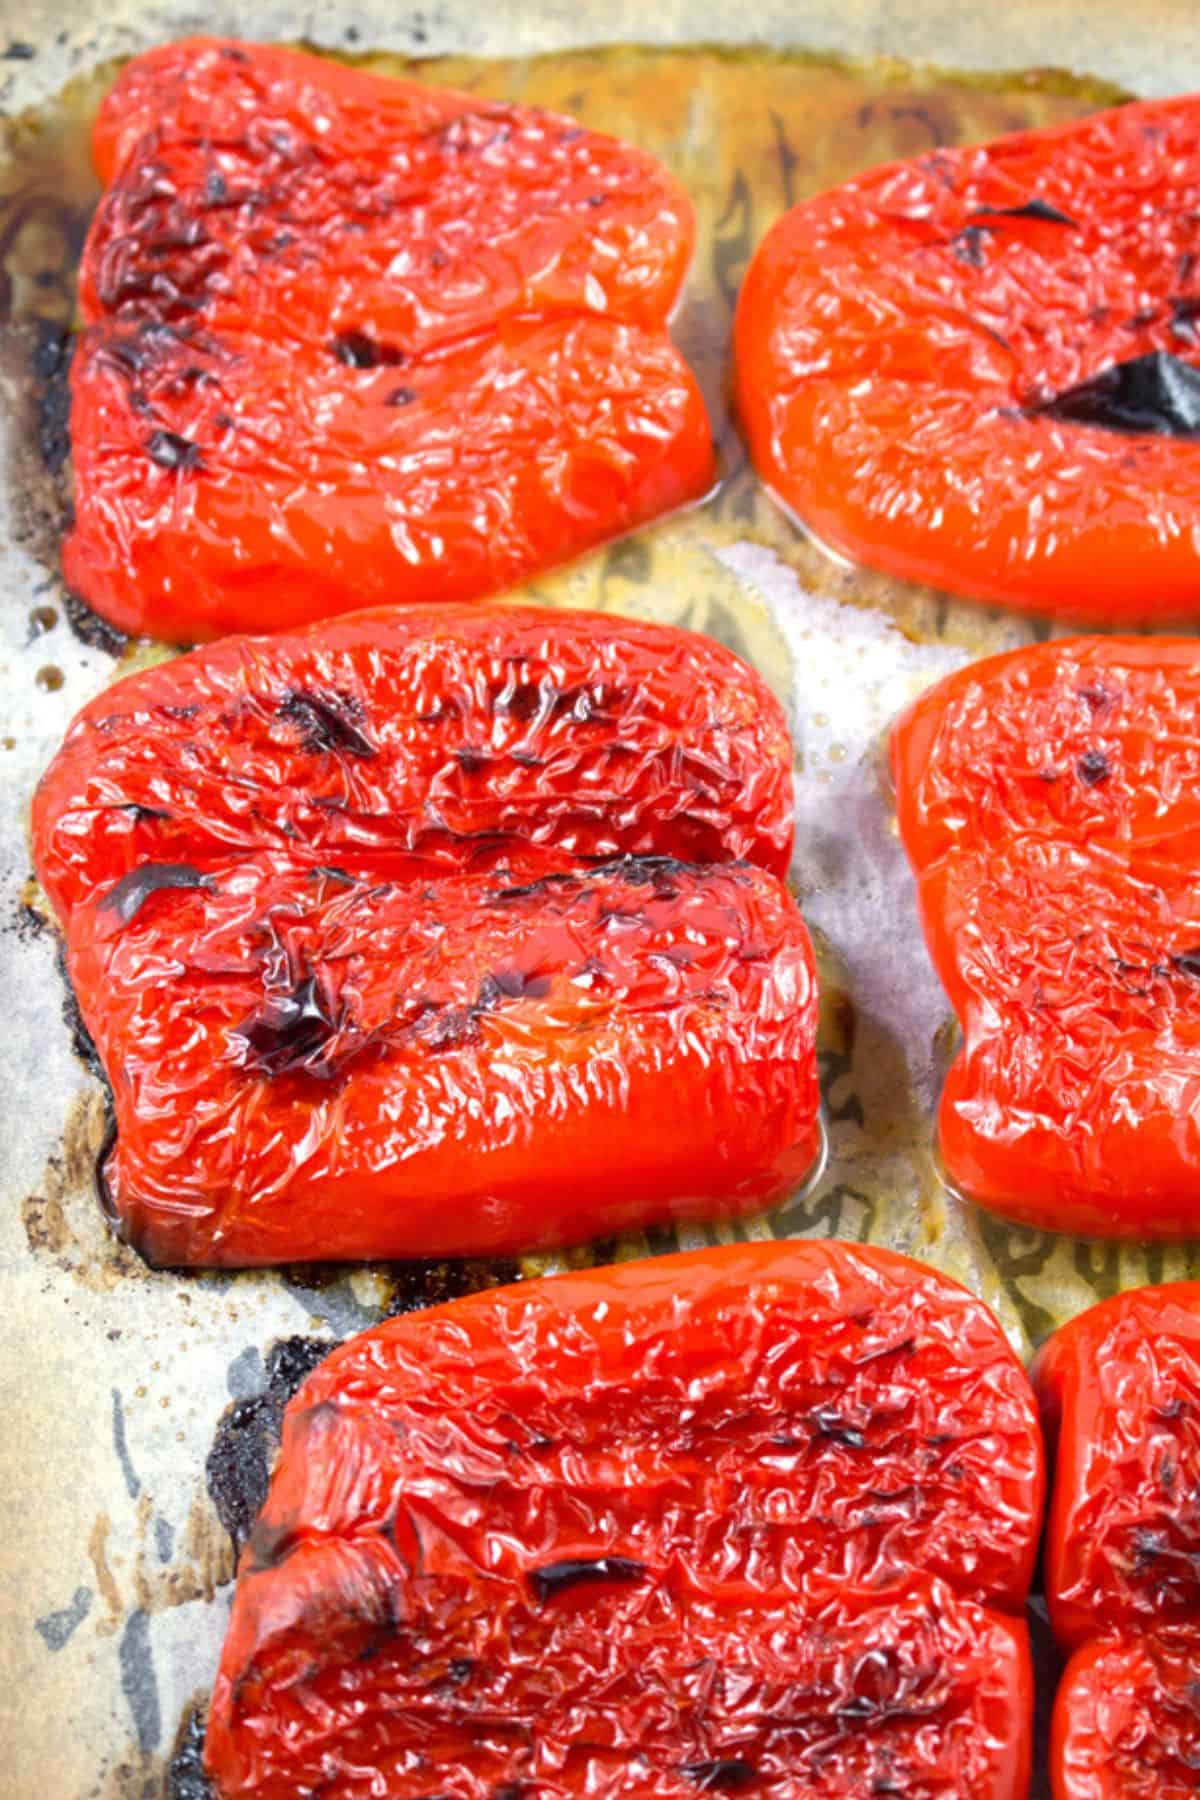 How To Make Roasted Red Peppers